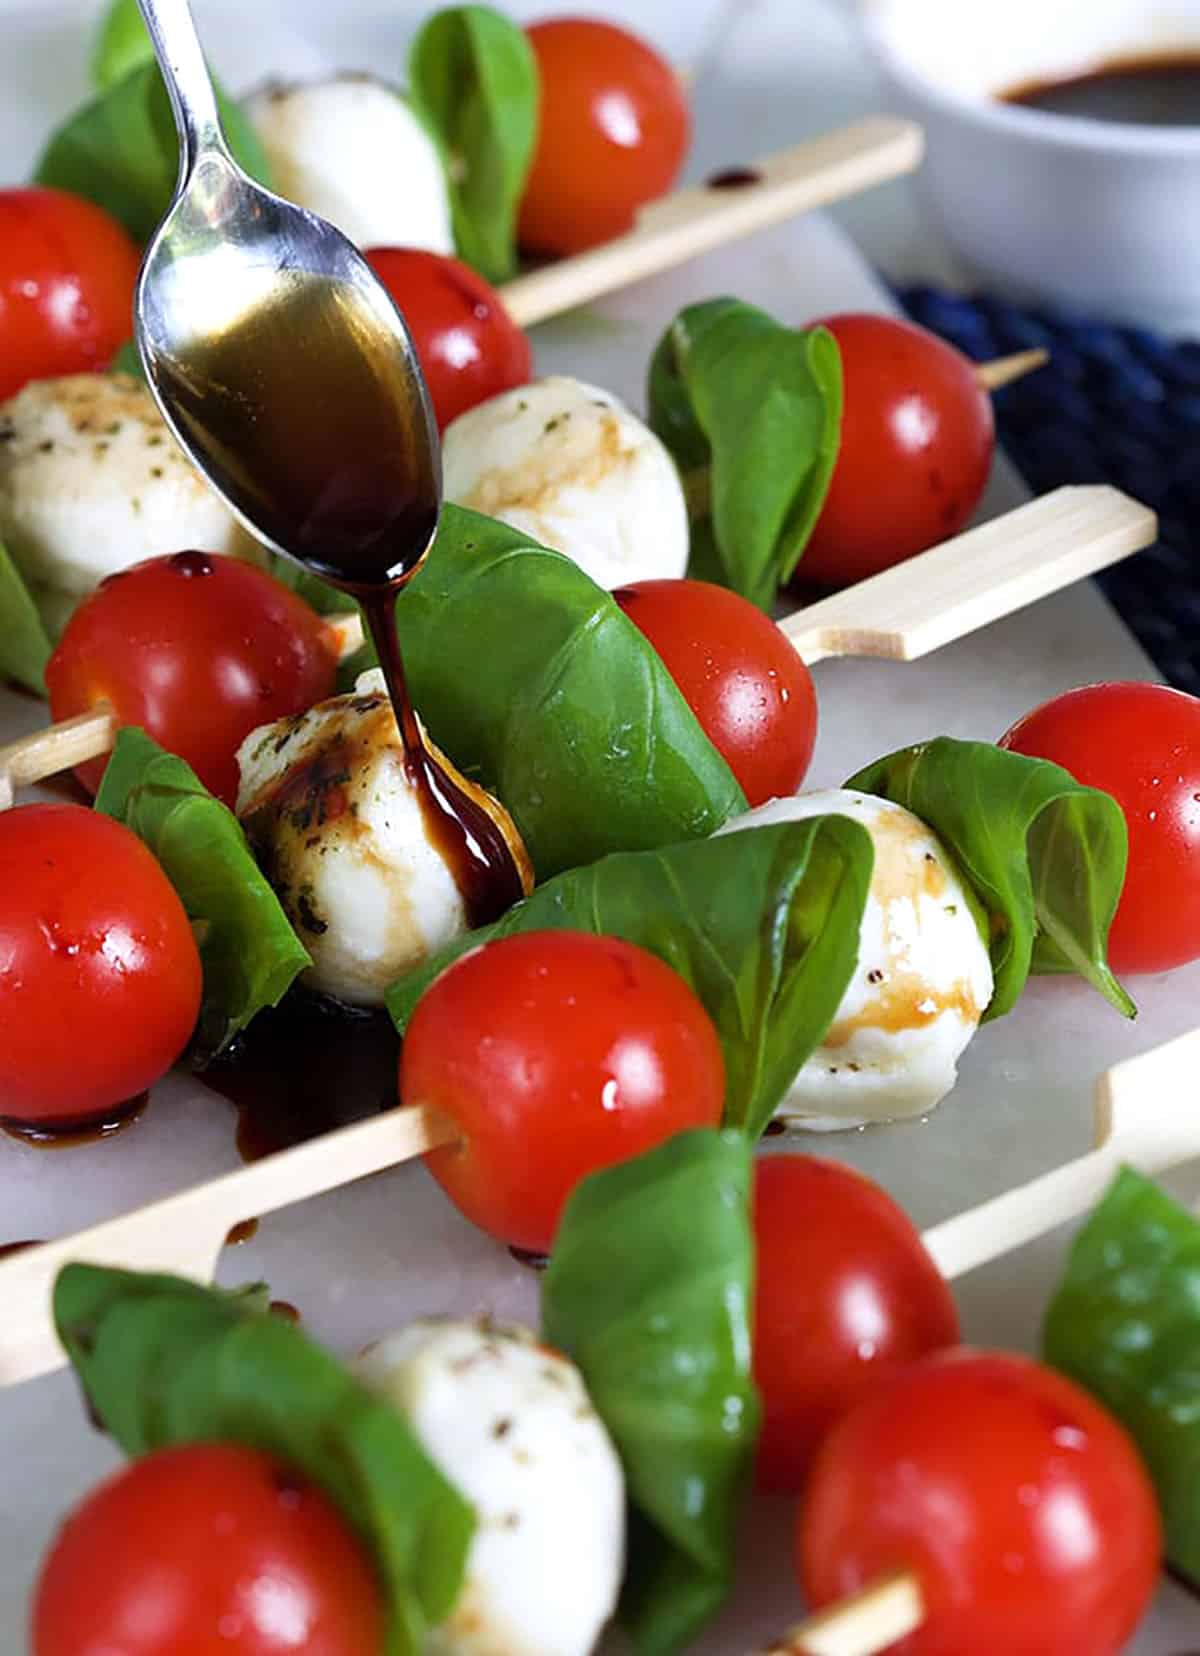 Caprese Salad Skewers with balsamic glaze being drizzled over it.